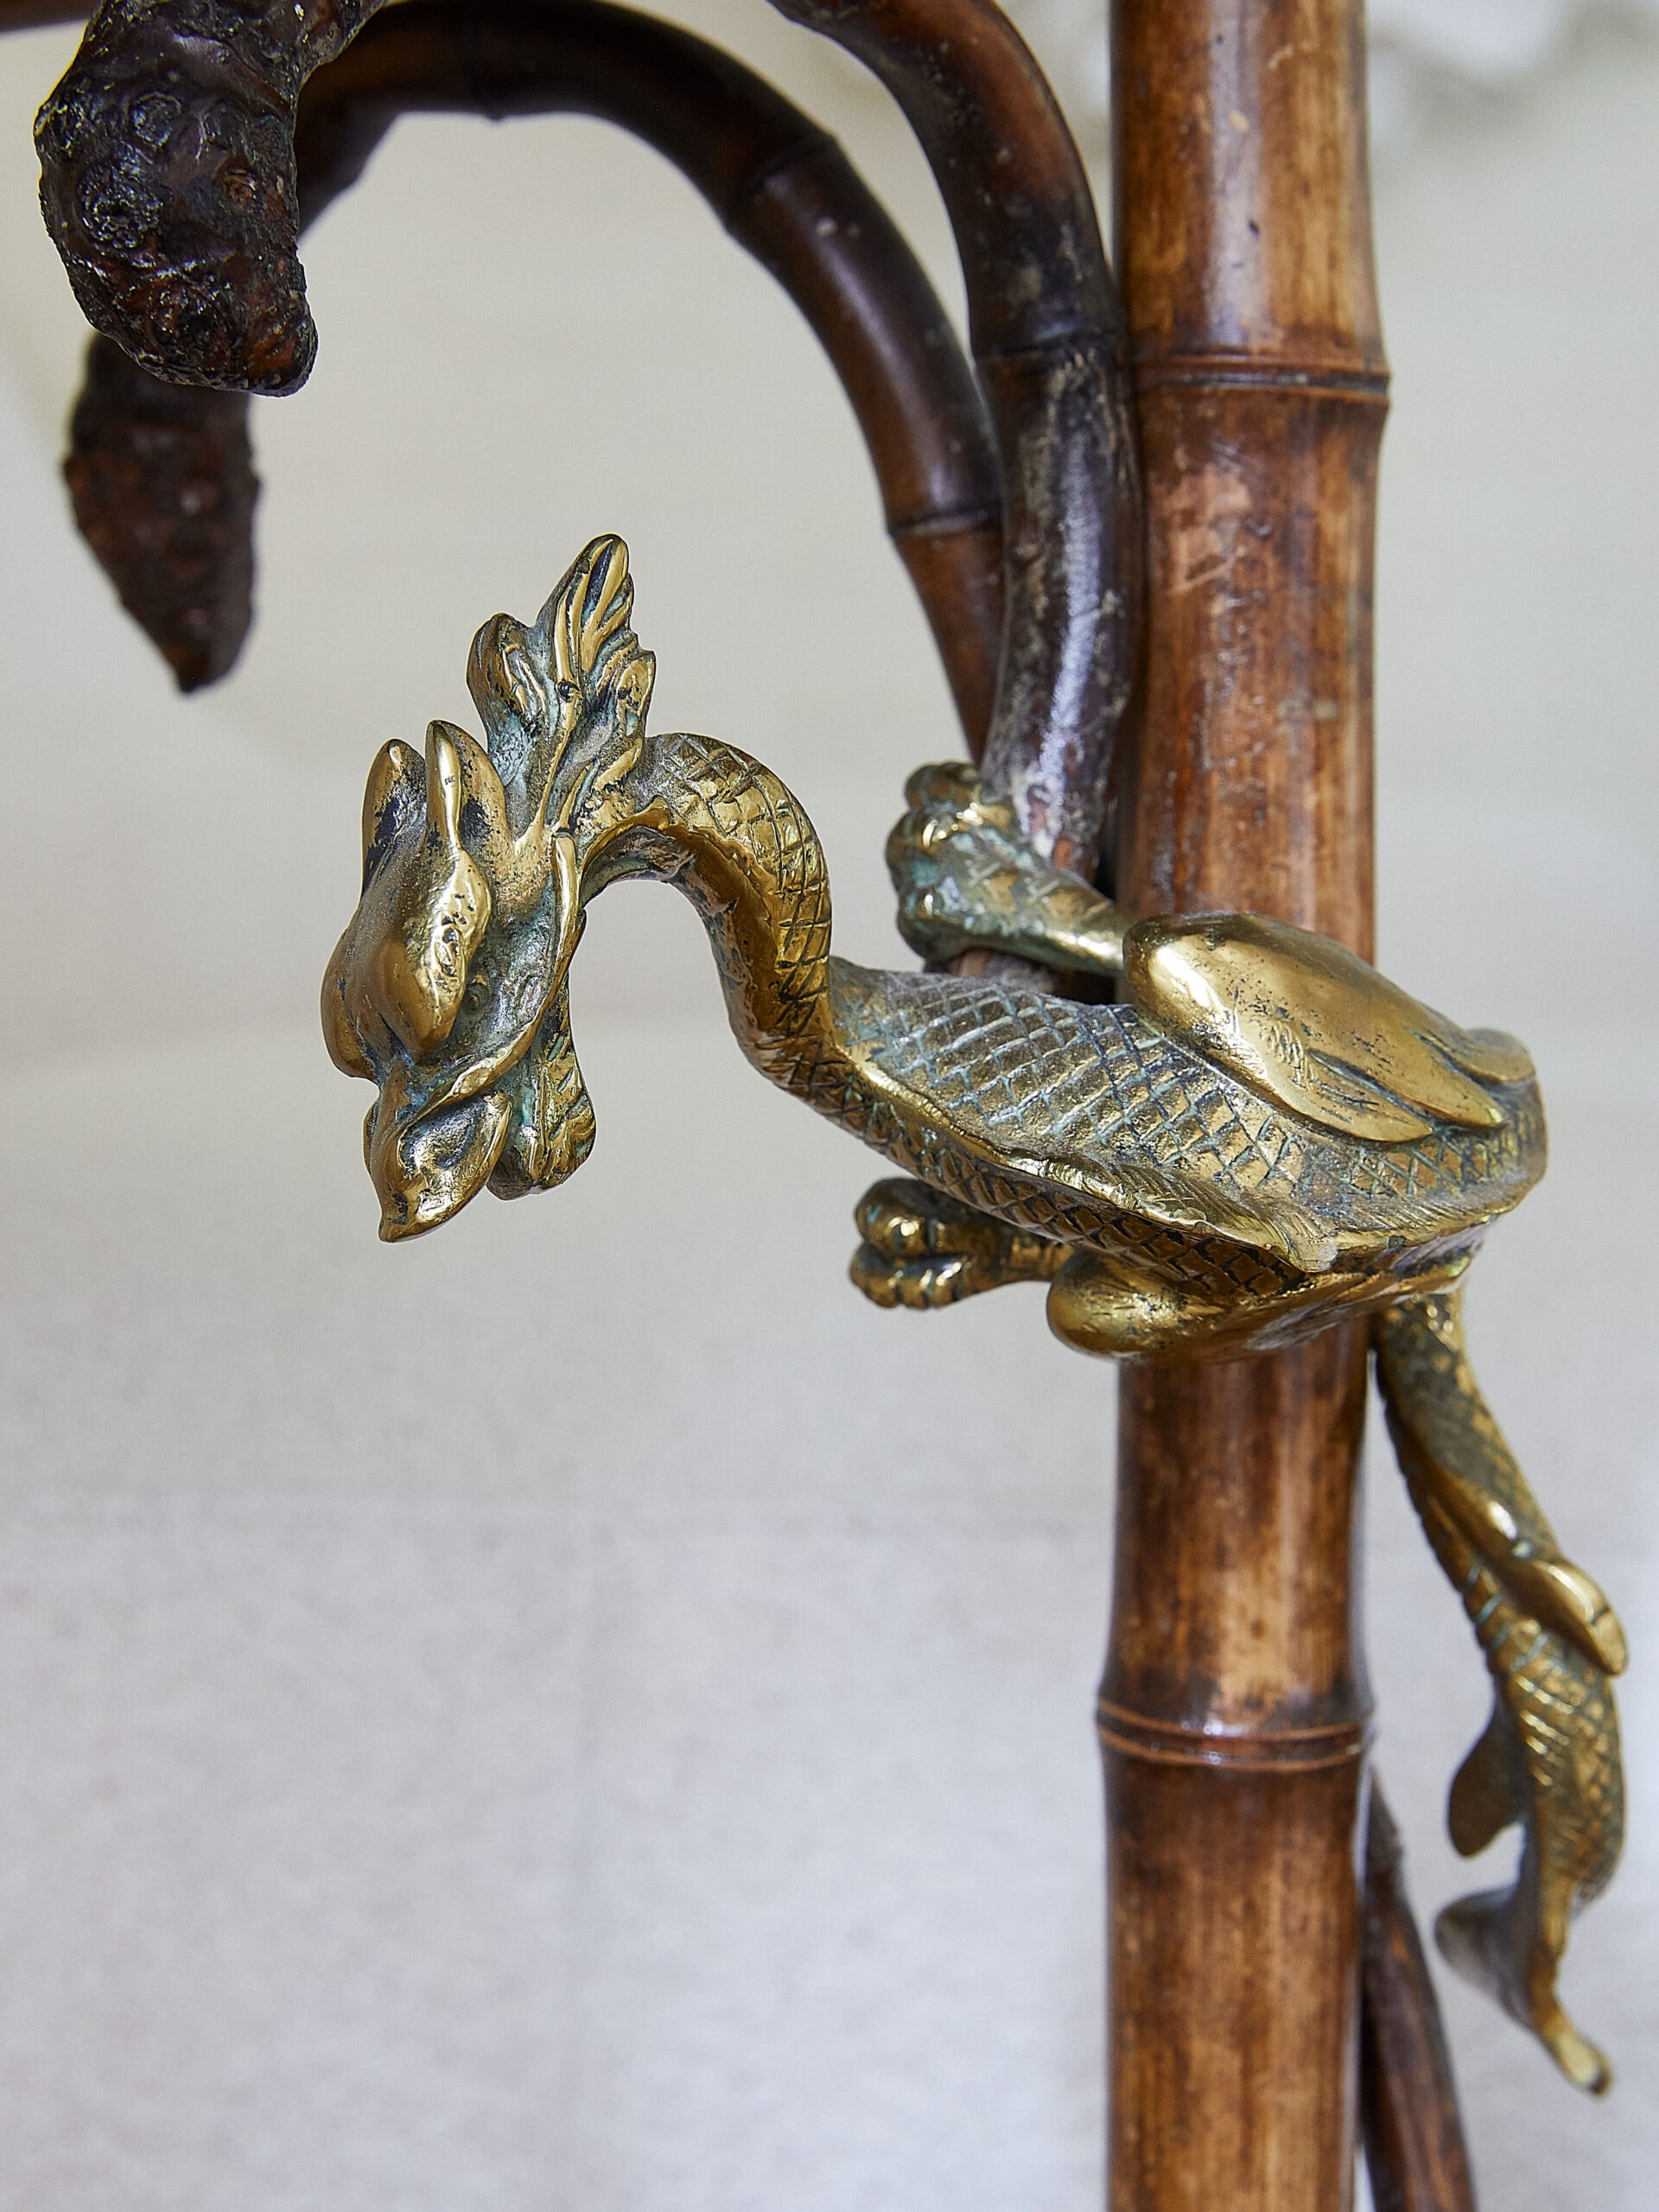 Antique chinoiserie table with brass dragons and bamboo legs from modern interior designers